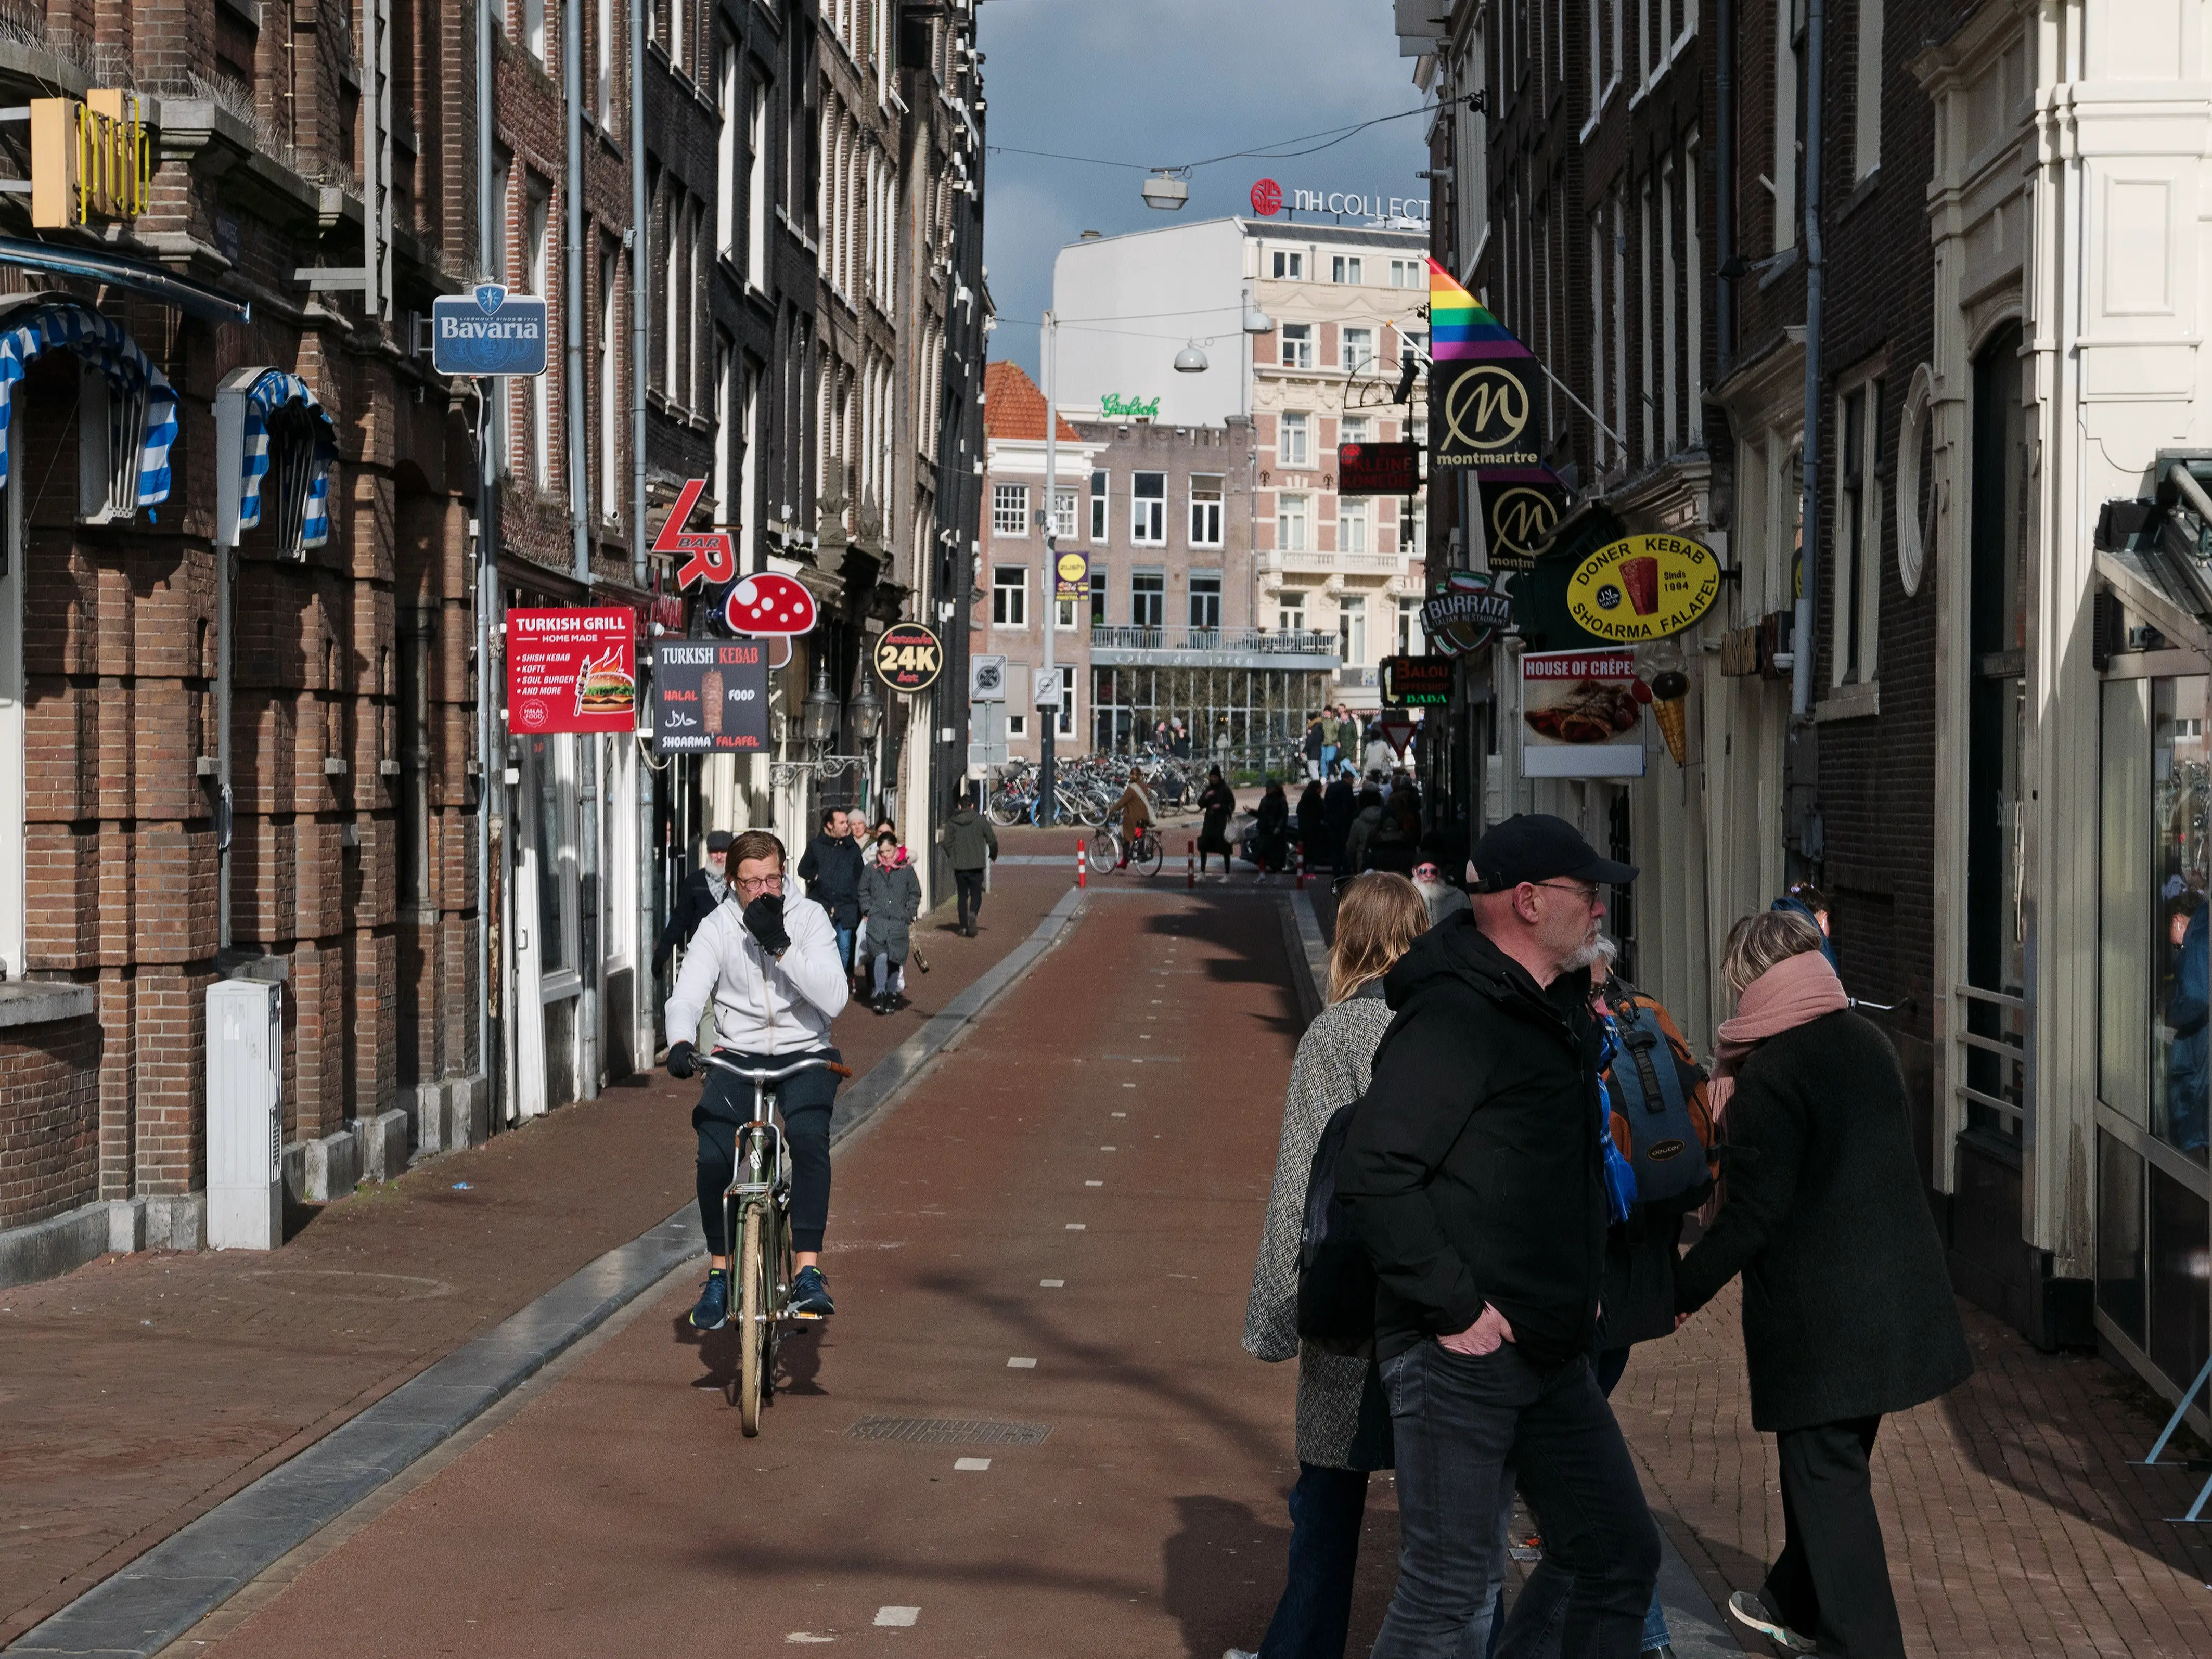 A person riding a bicycle with a helmet on while passing by a car on a city street.